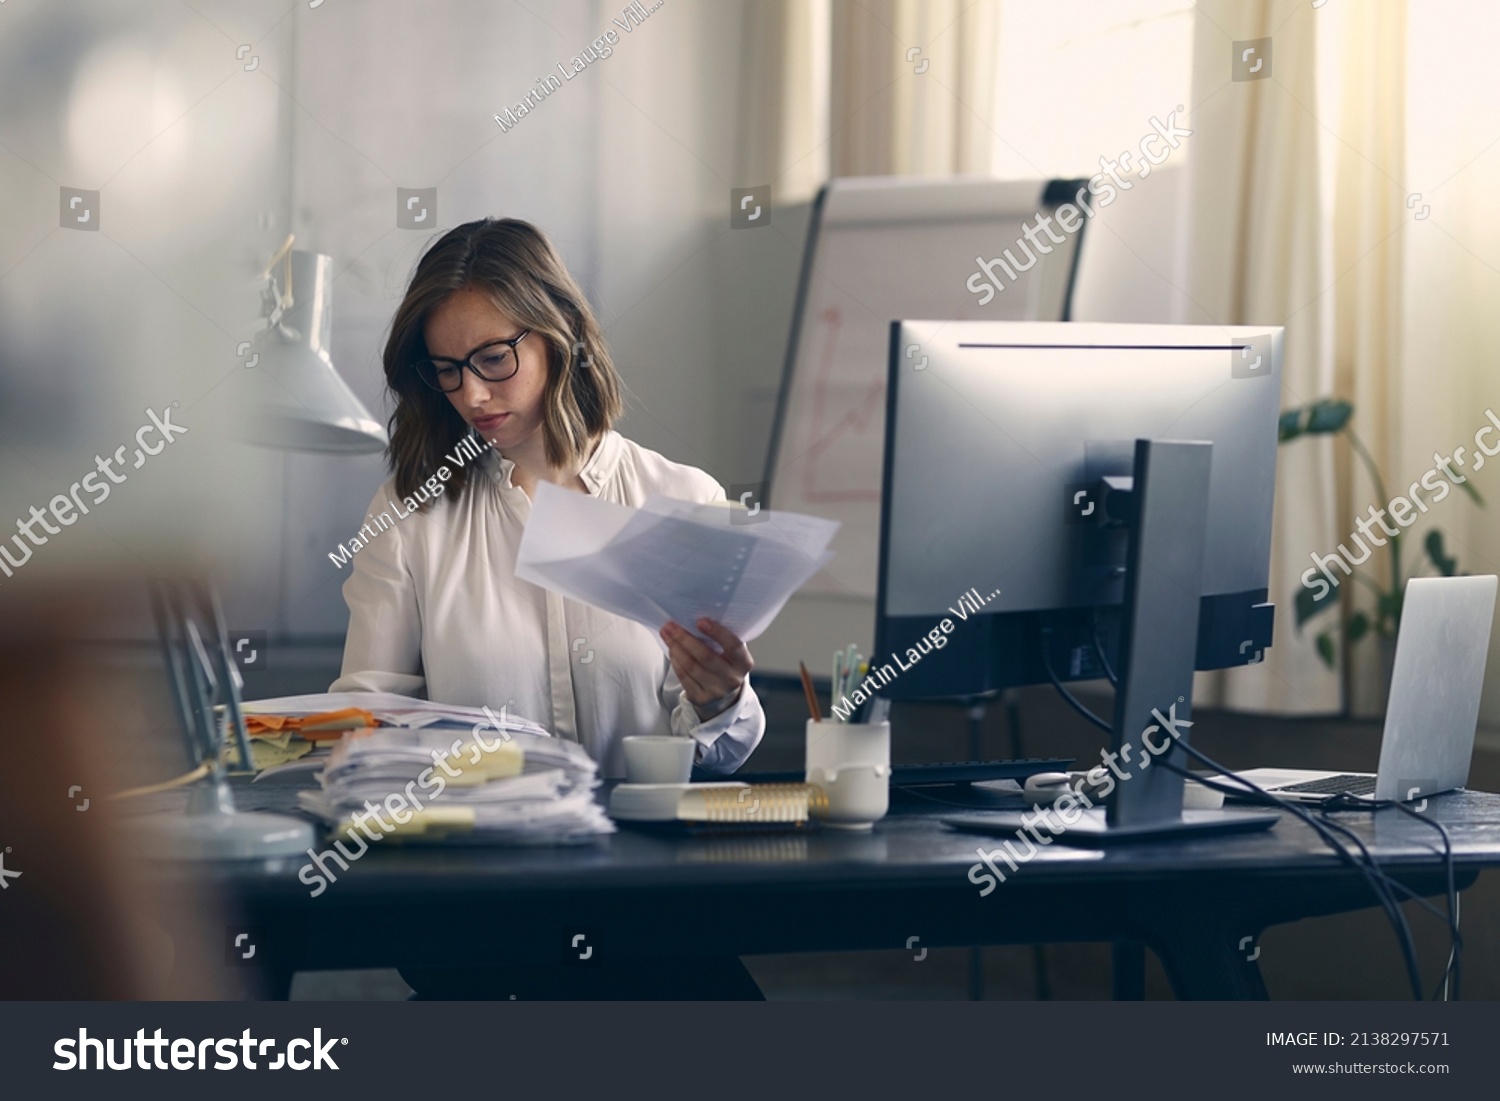 Beautiful young business woman sitting concentrated at her work in front of her office computer. #2138297571